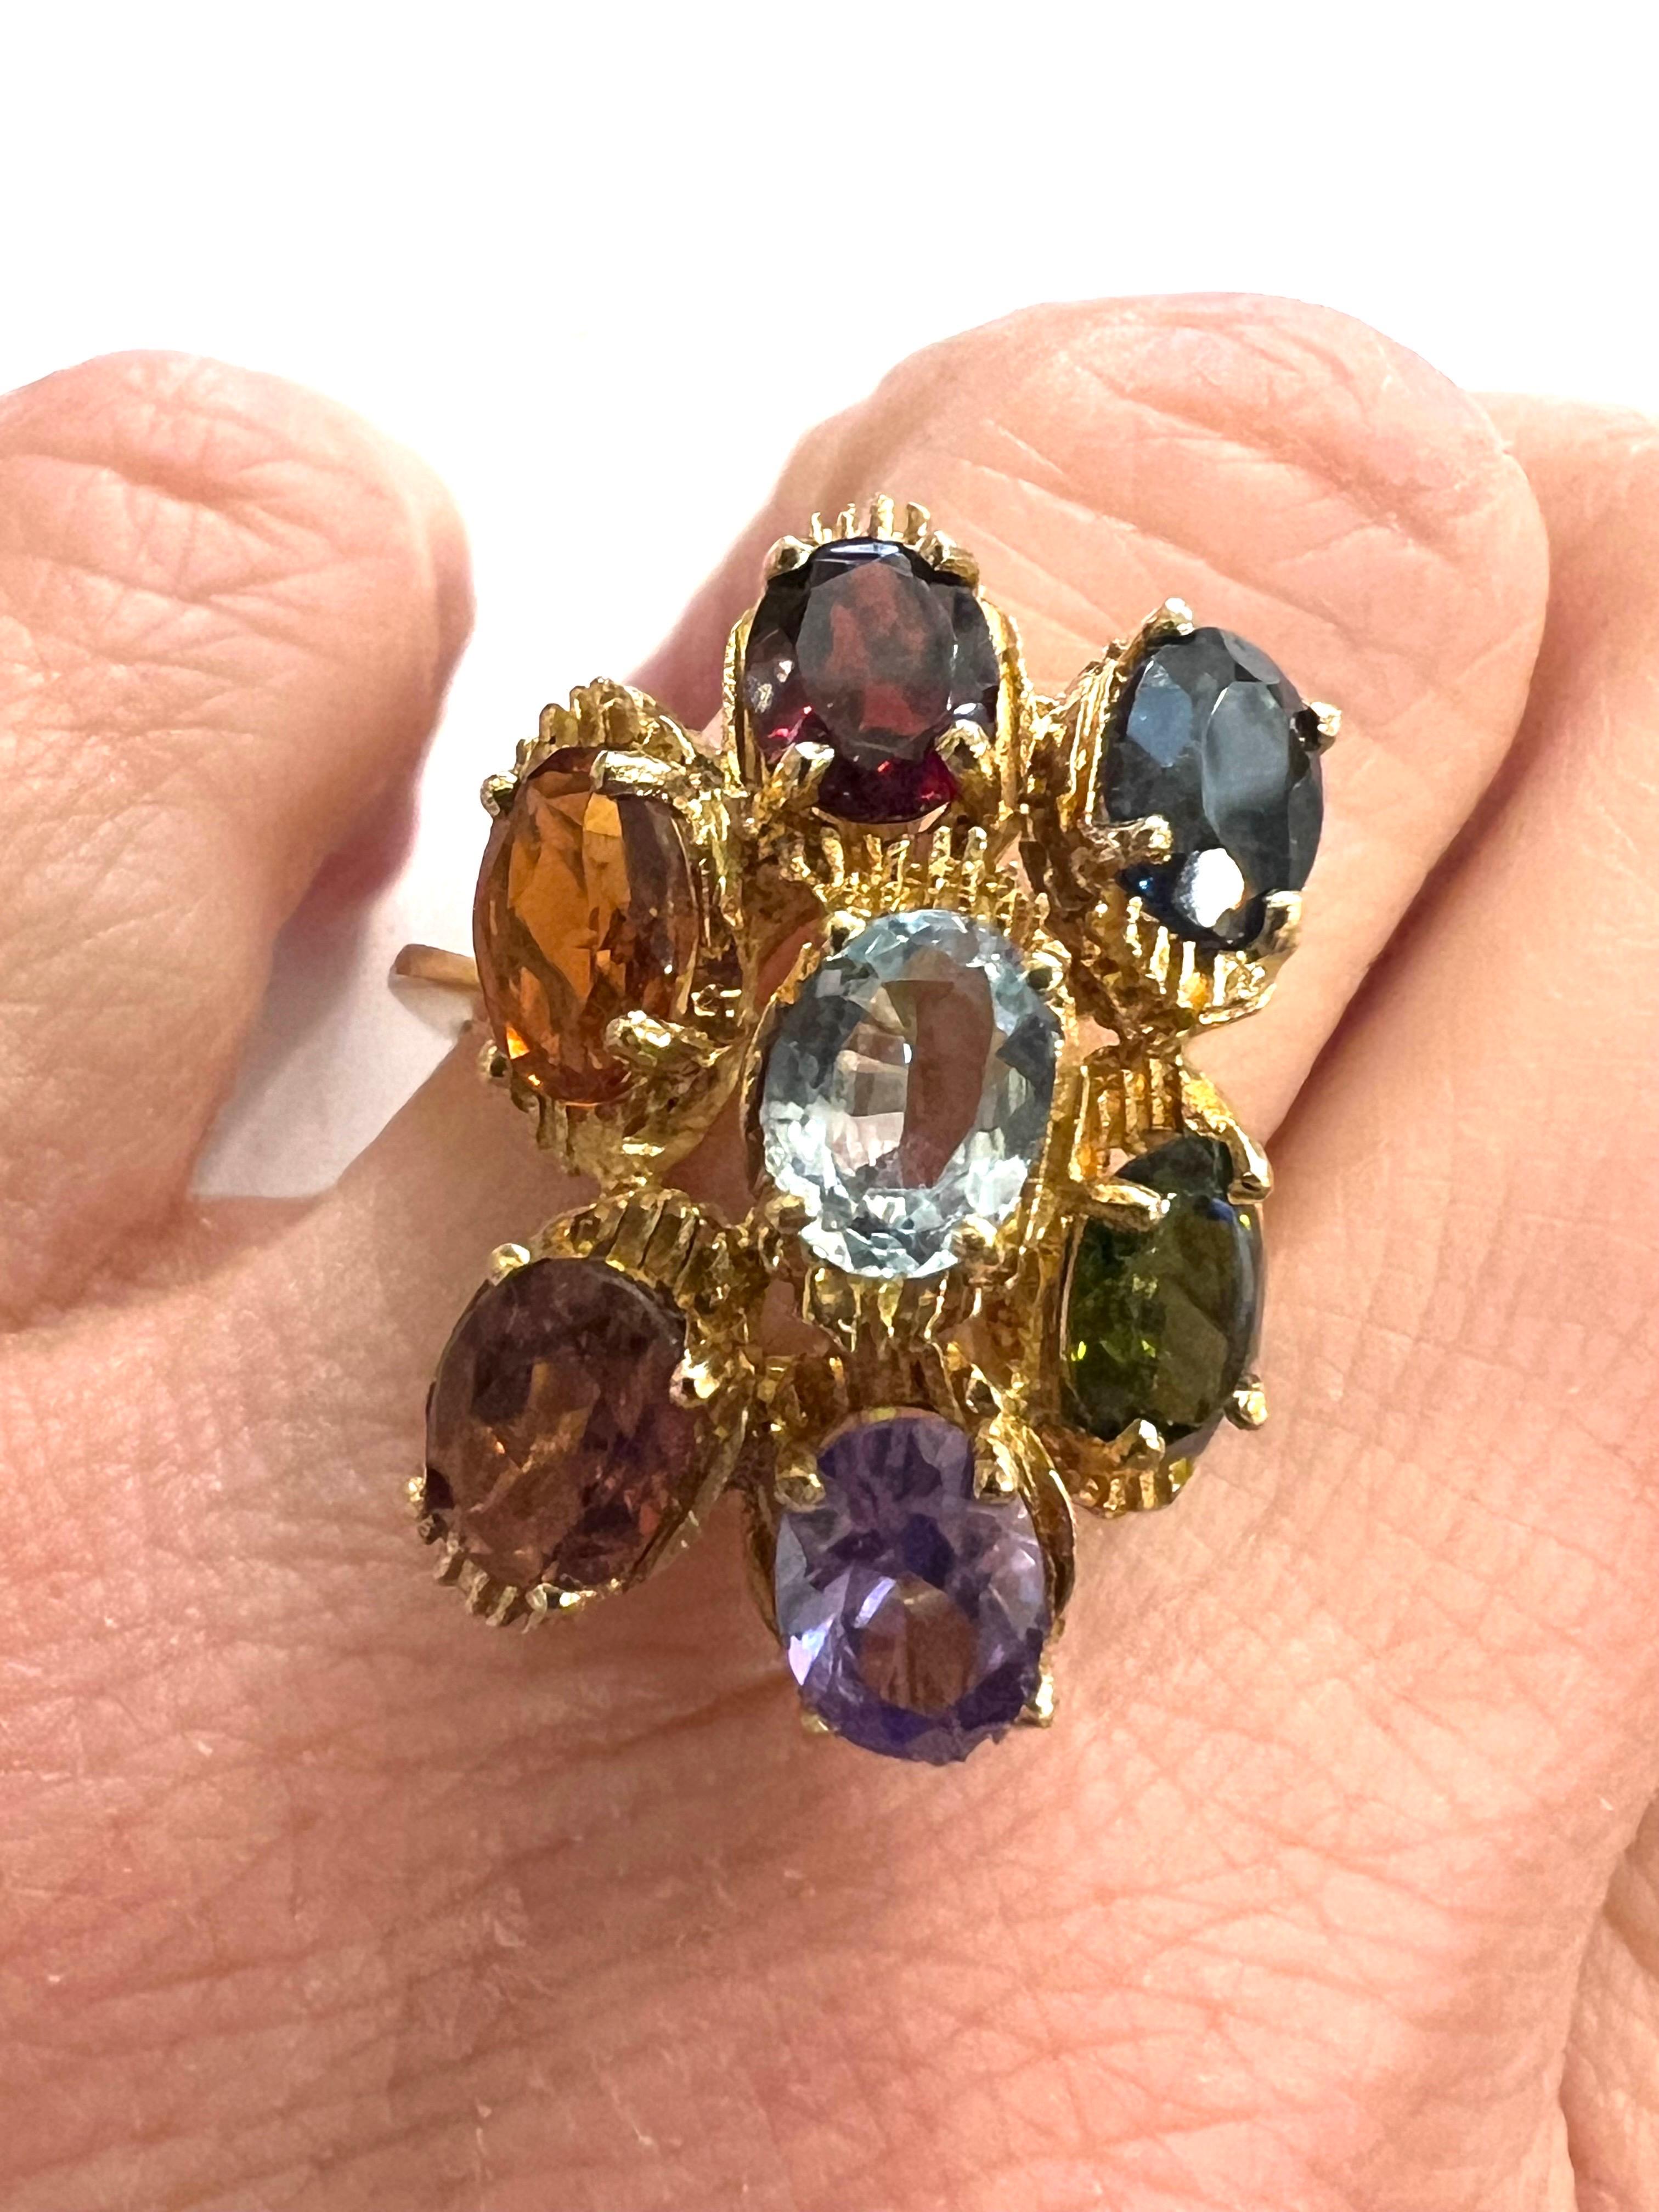 A beautiful and colorful 1960's ring from the 